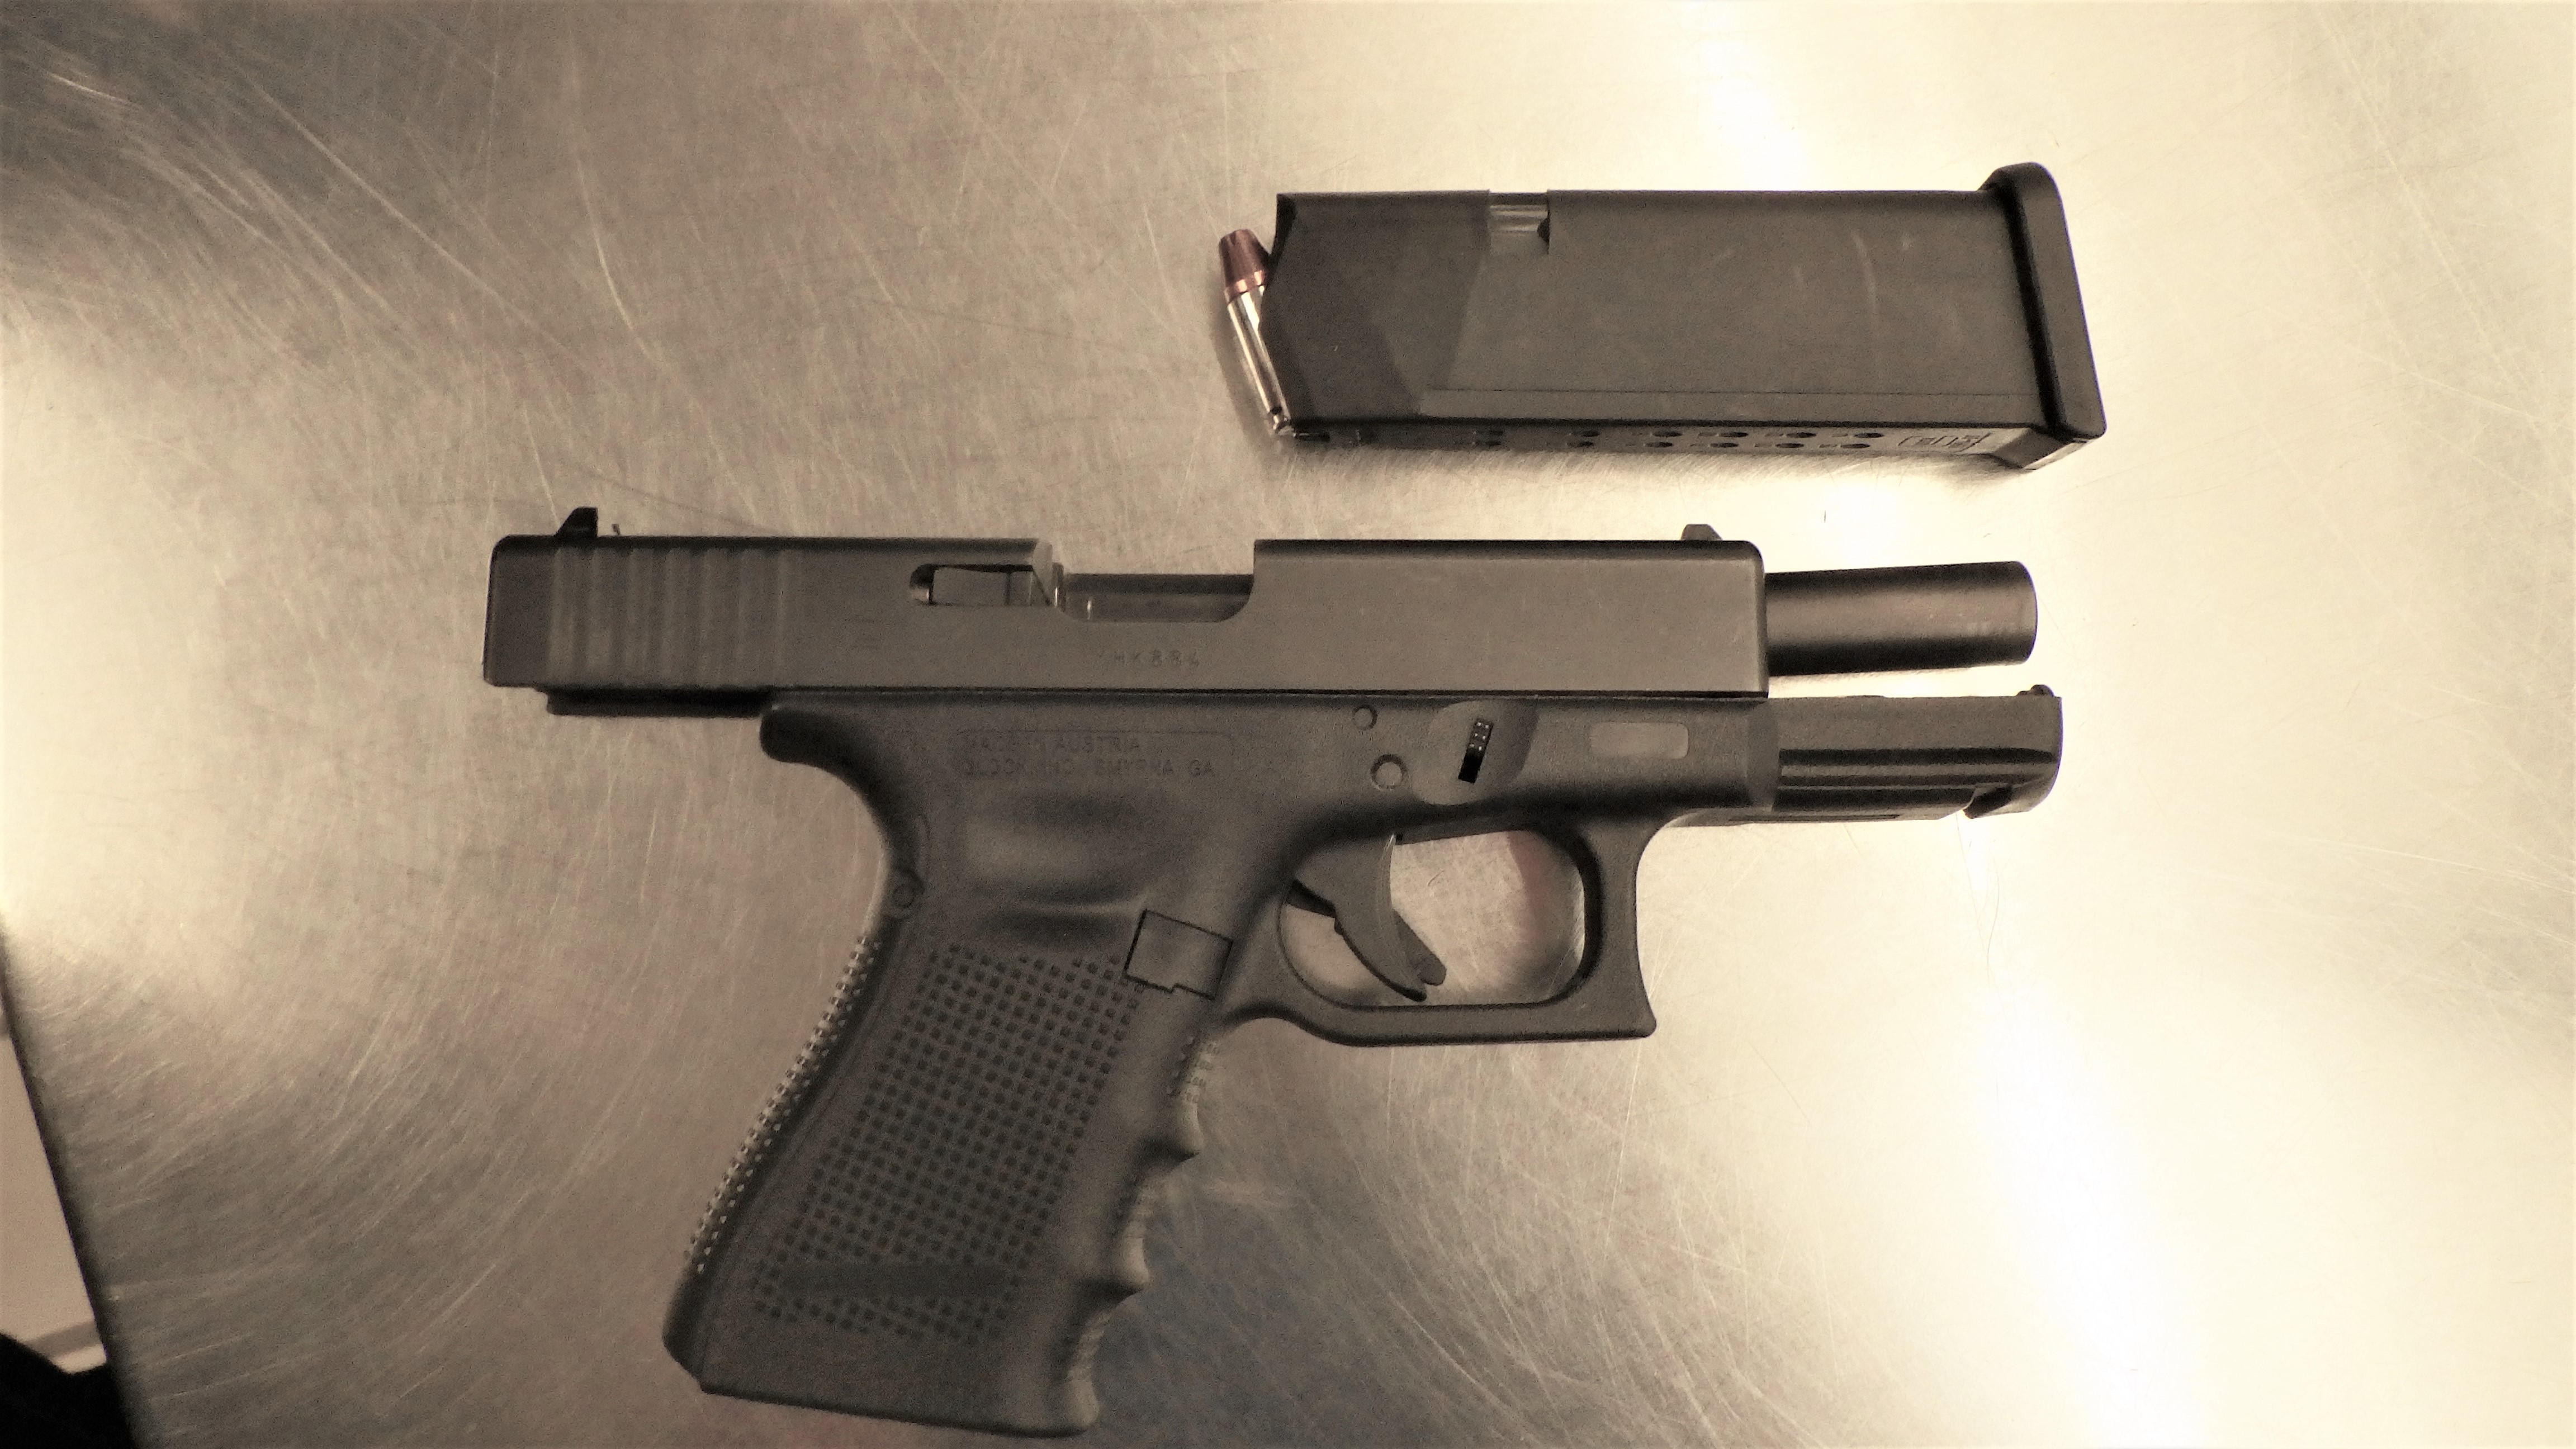 TSA officers at Pittsburgh International Airport prevented a man from carrying this handgun onto his flight on September 14. 